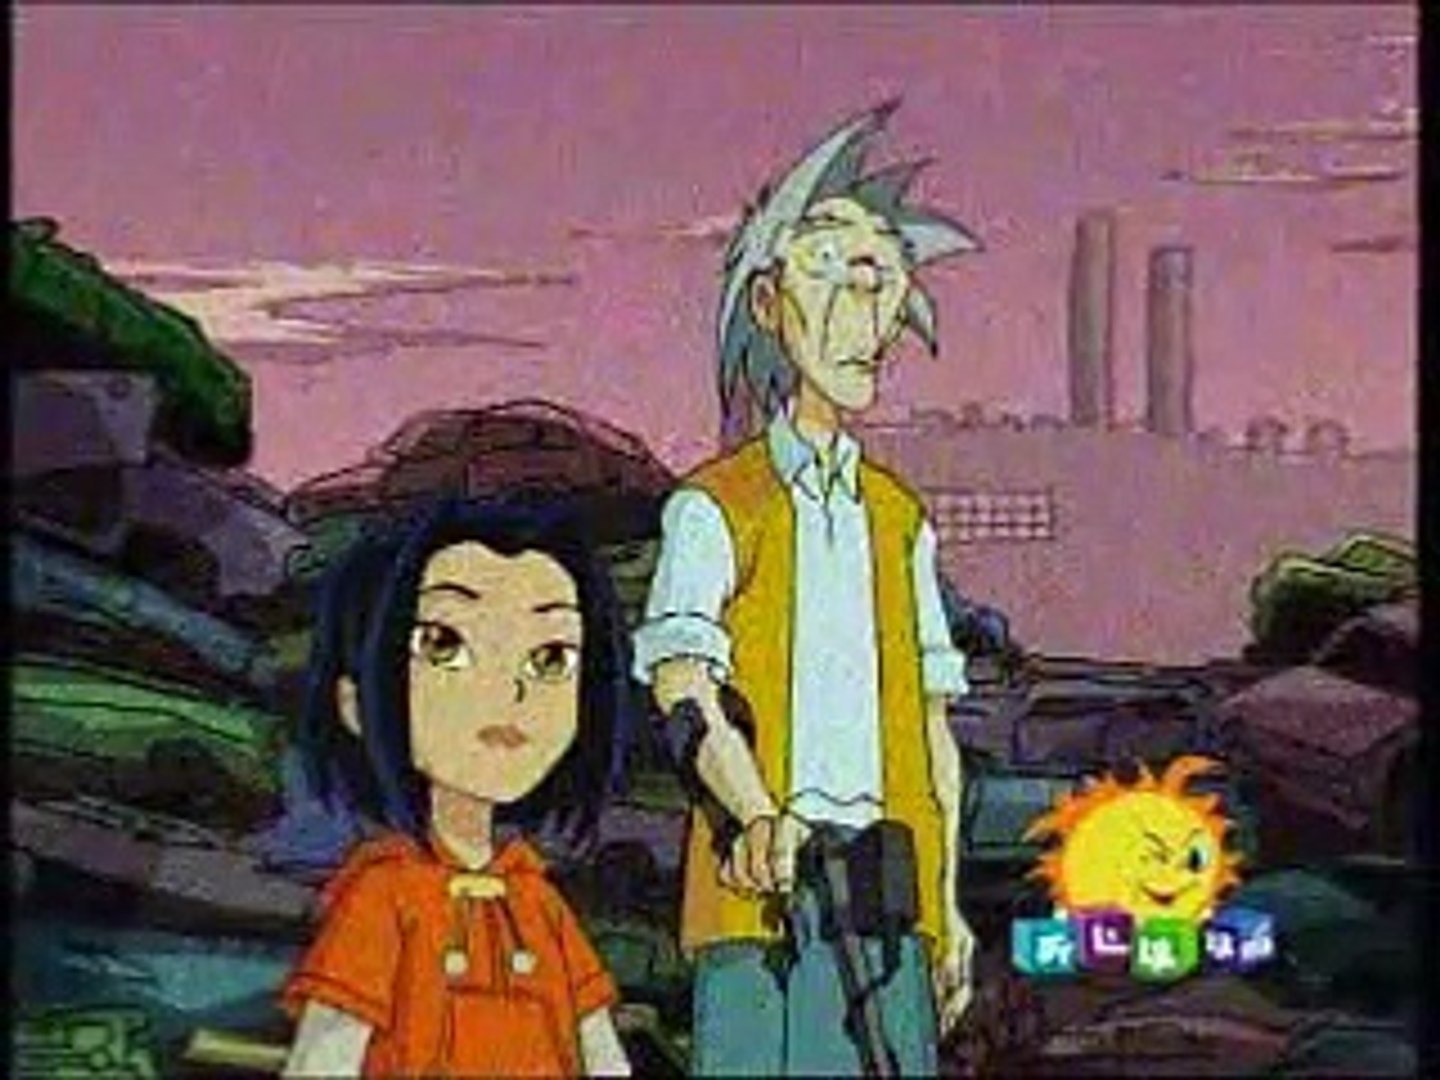 JACKIE CHAN ADVENTURES [Drago come from future] - video Dailymotion